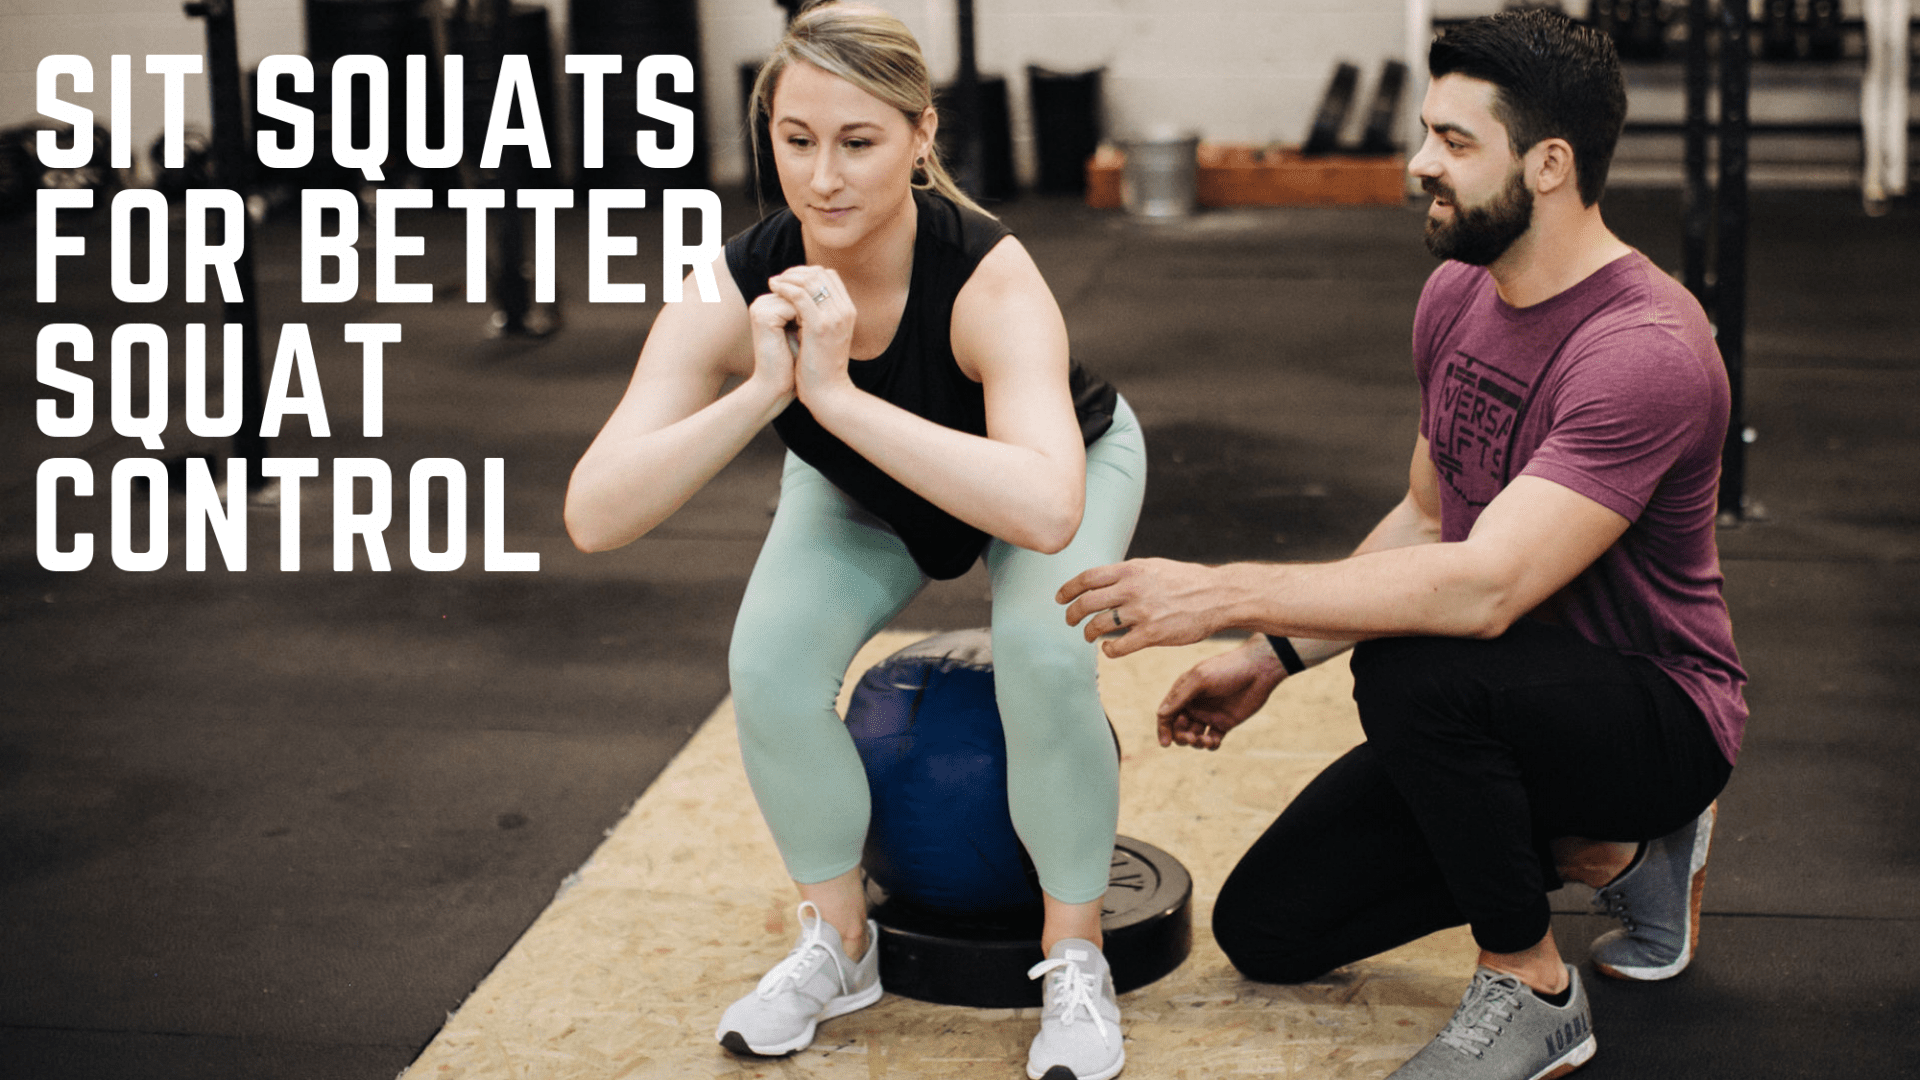 Featured image for “Sit Squats for Better Squat Control”